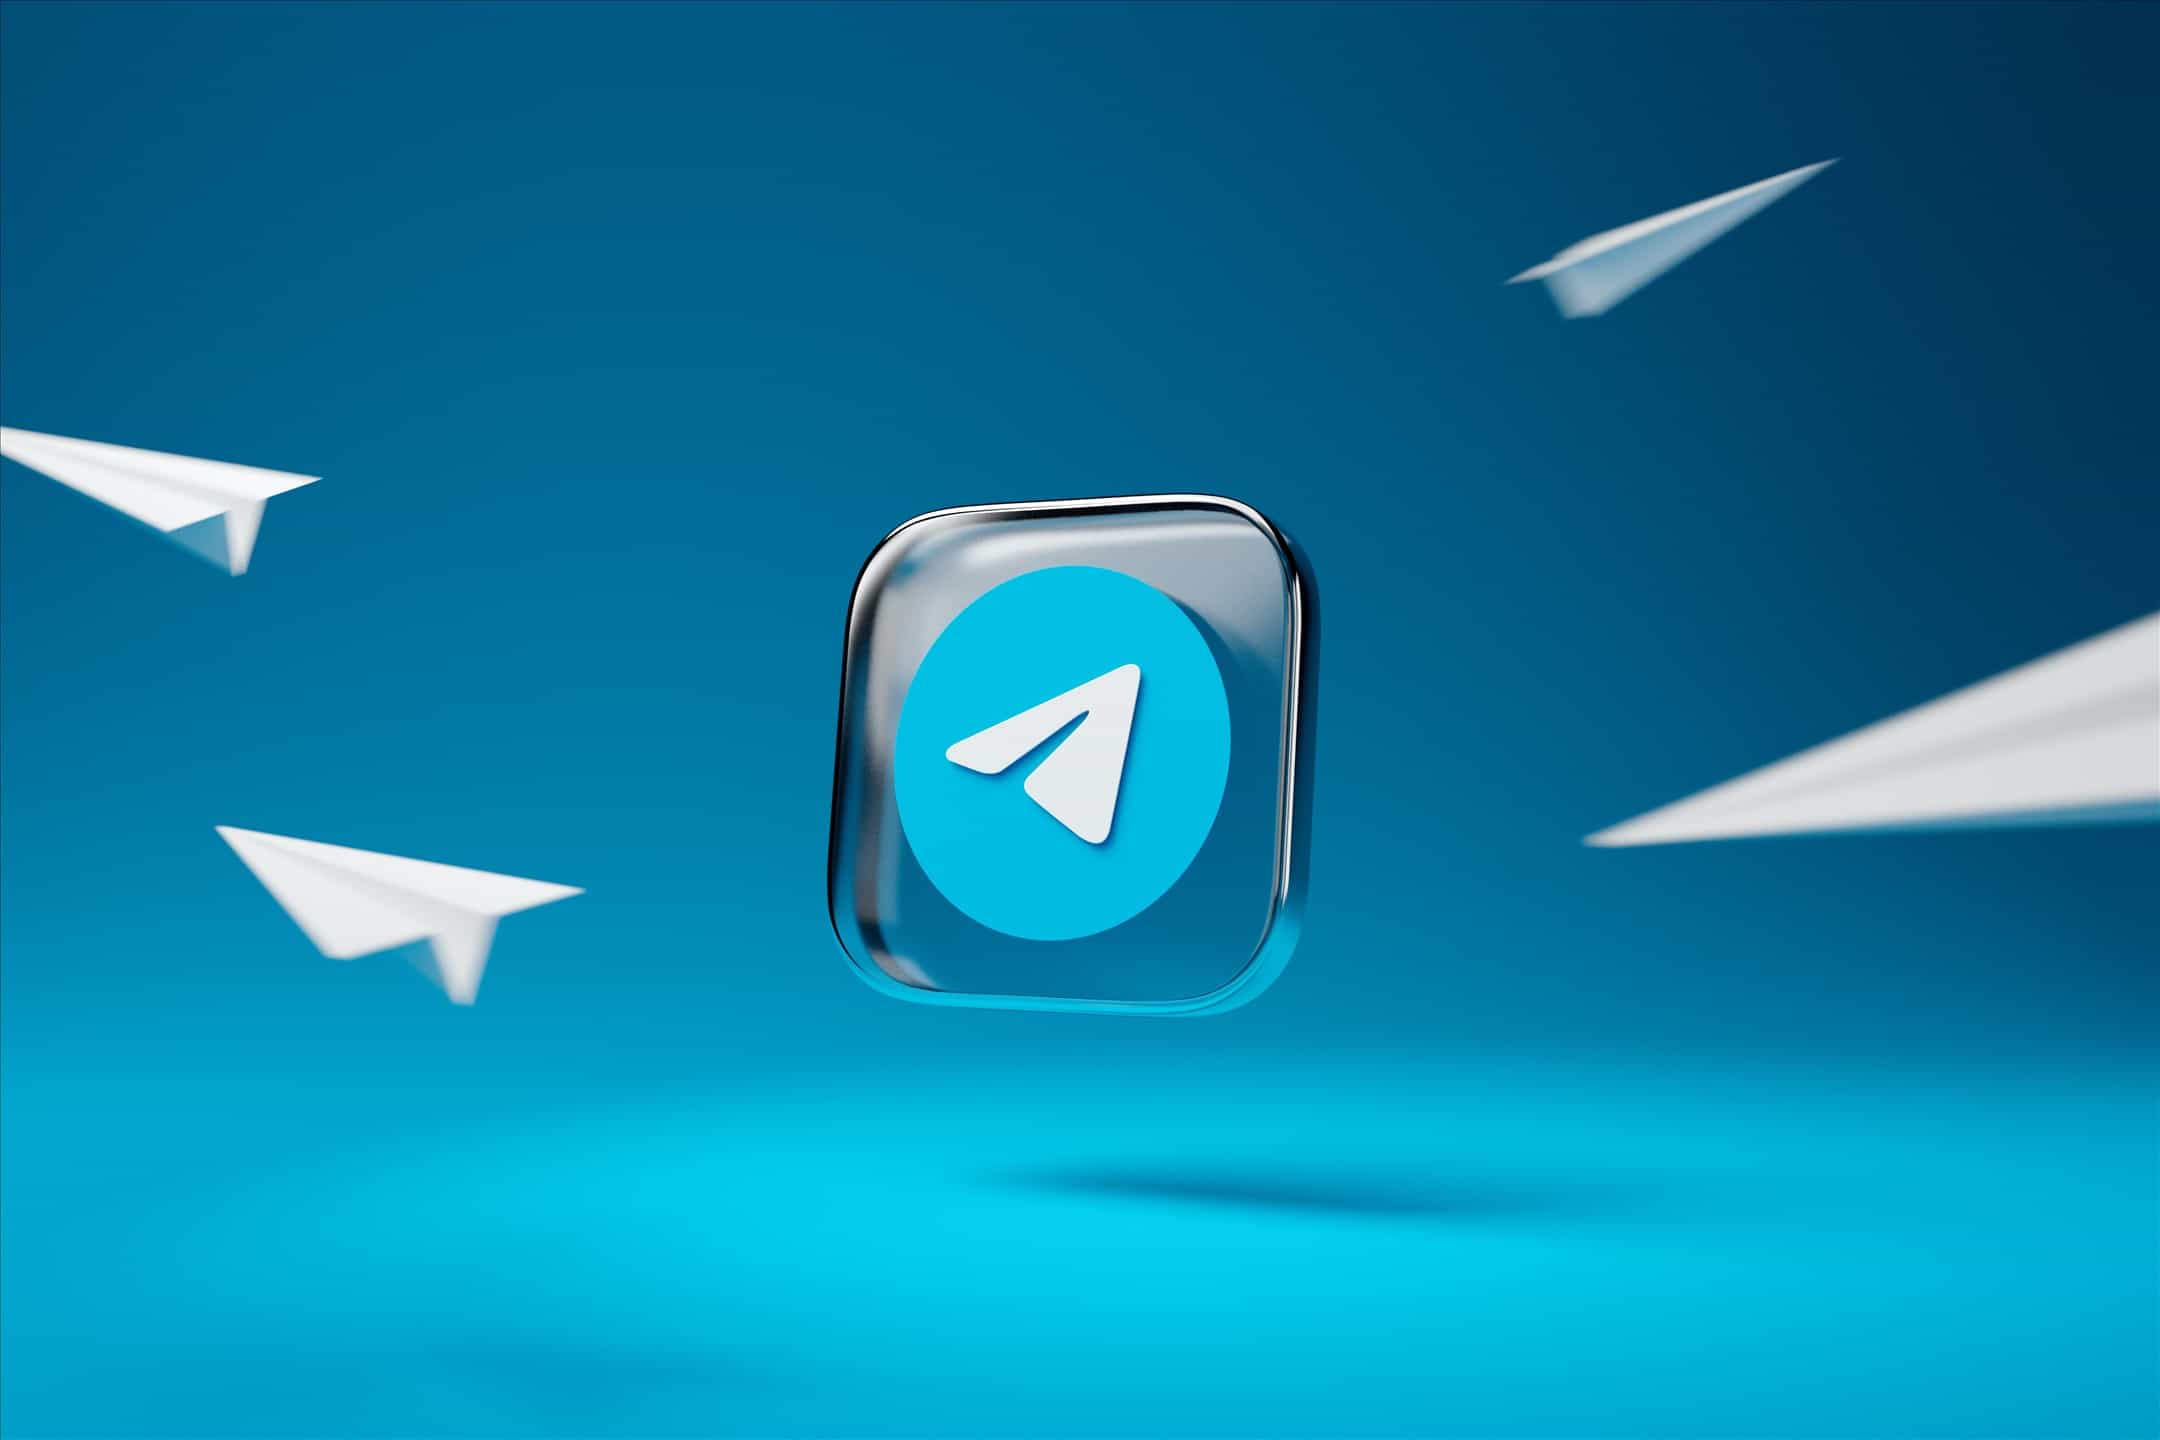 How to create a Telegram account without a phone?